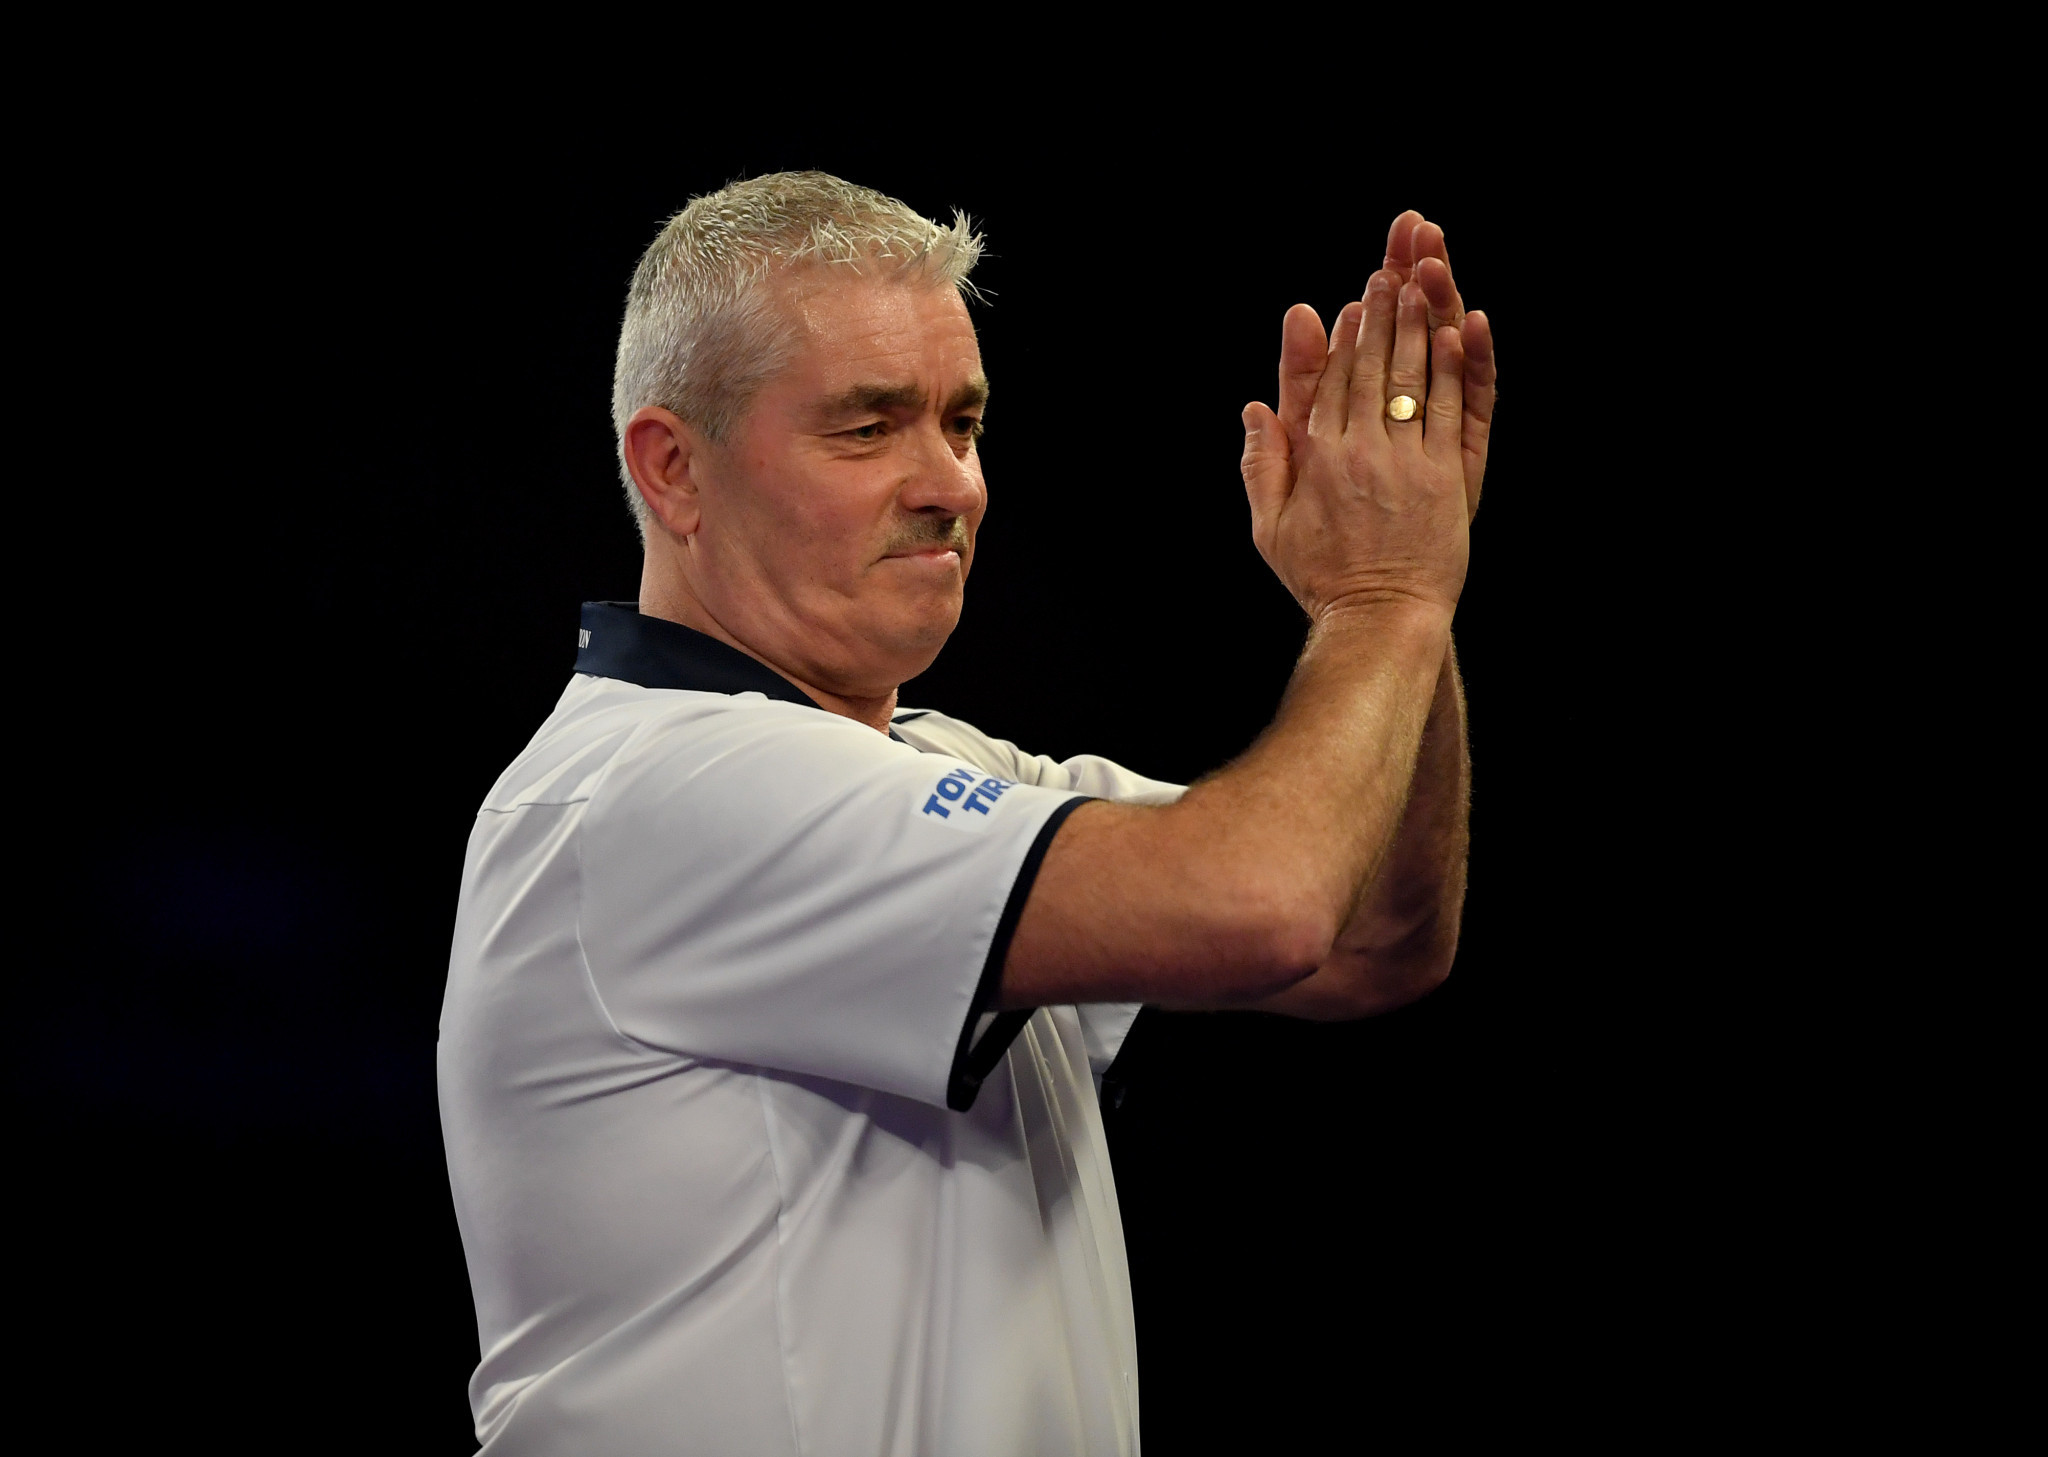 Former world champion Steve Beaton squeezed past Fallon Sherrock in the first round ©Getty Images